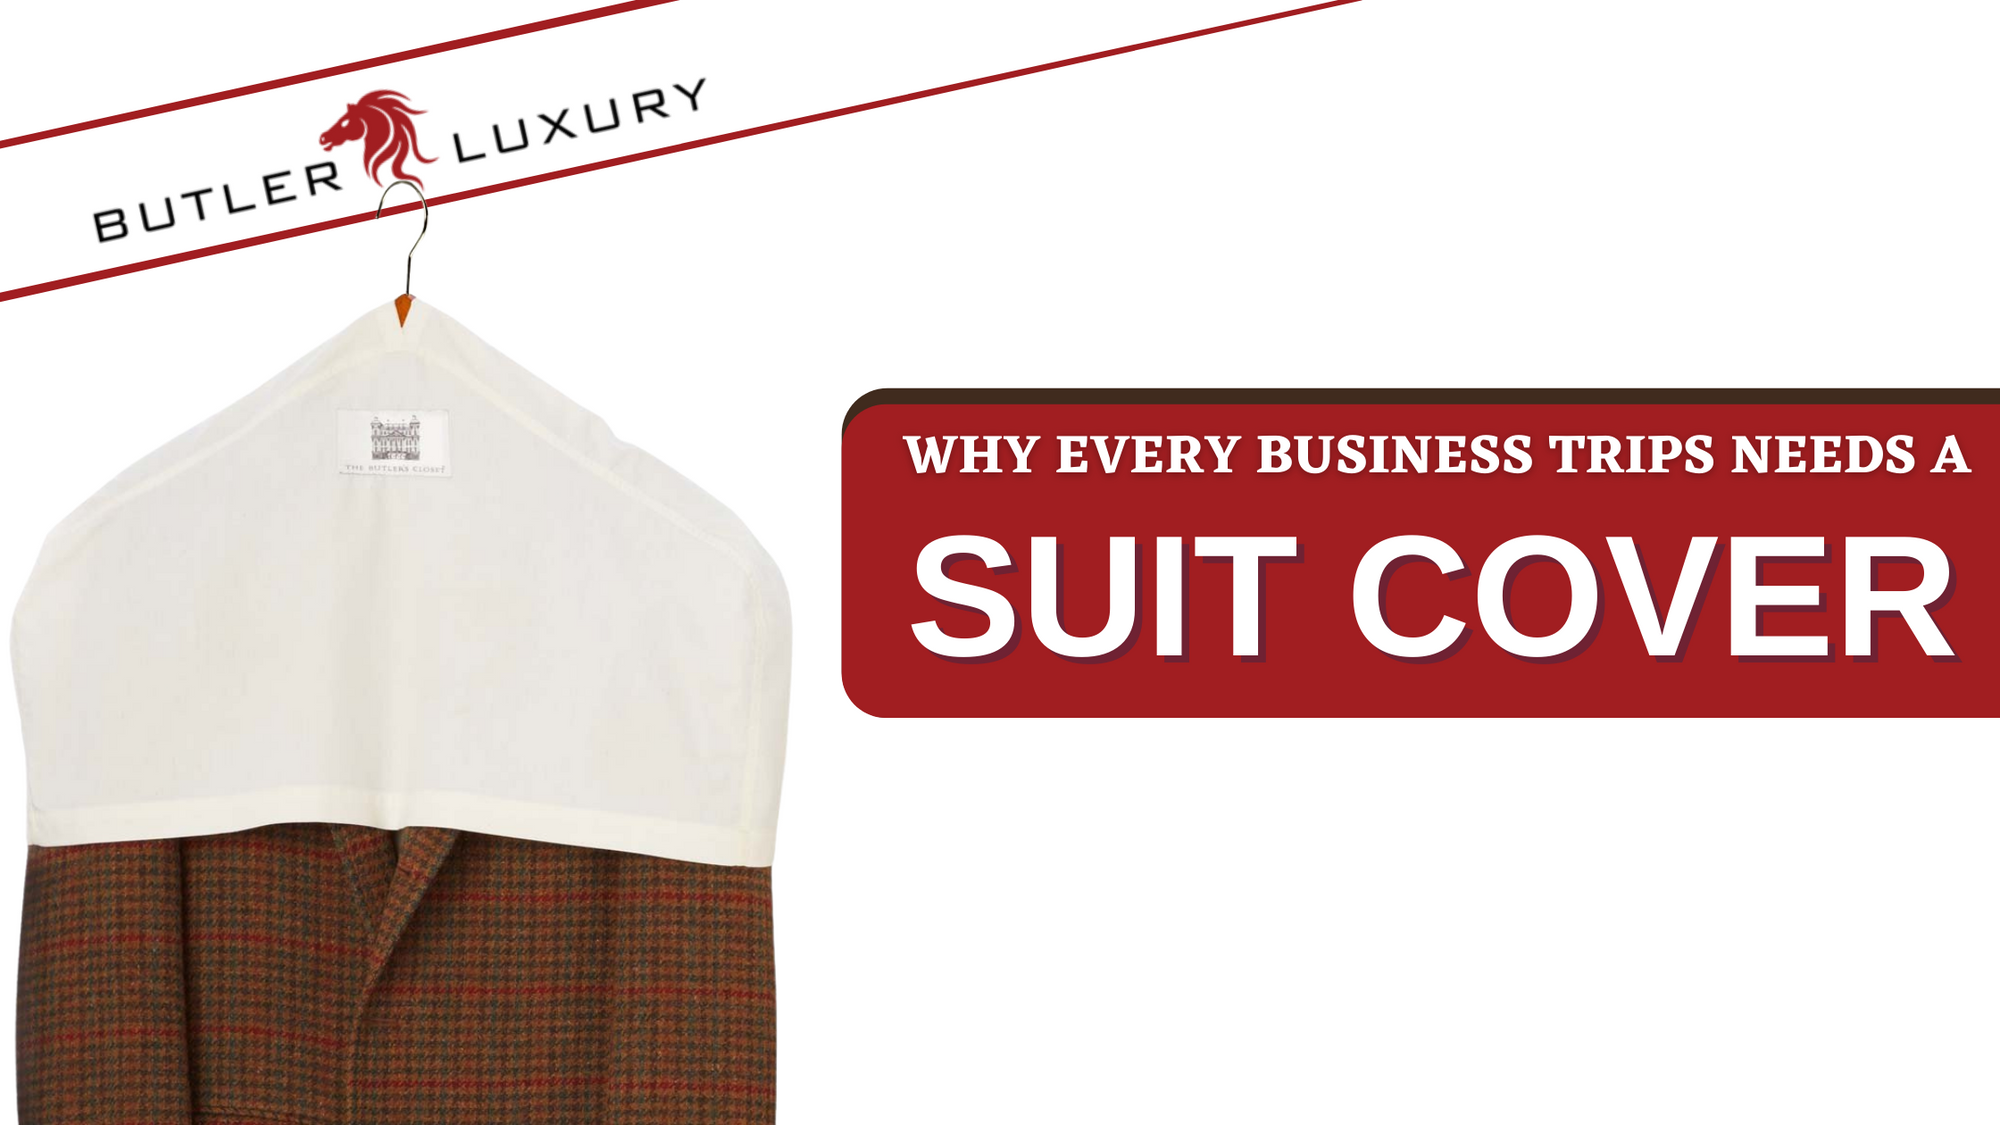 Here’s Why Every Business Trip Should Include a Butler Luxury Suit Cover